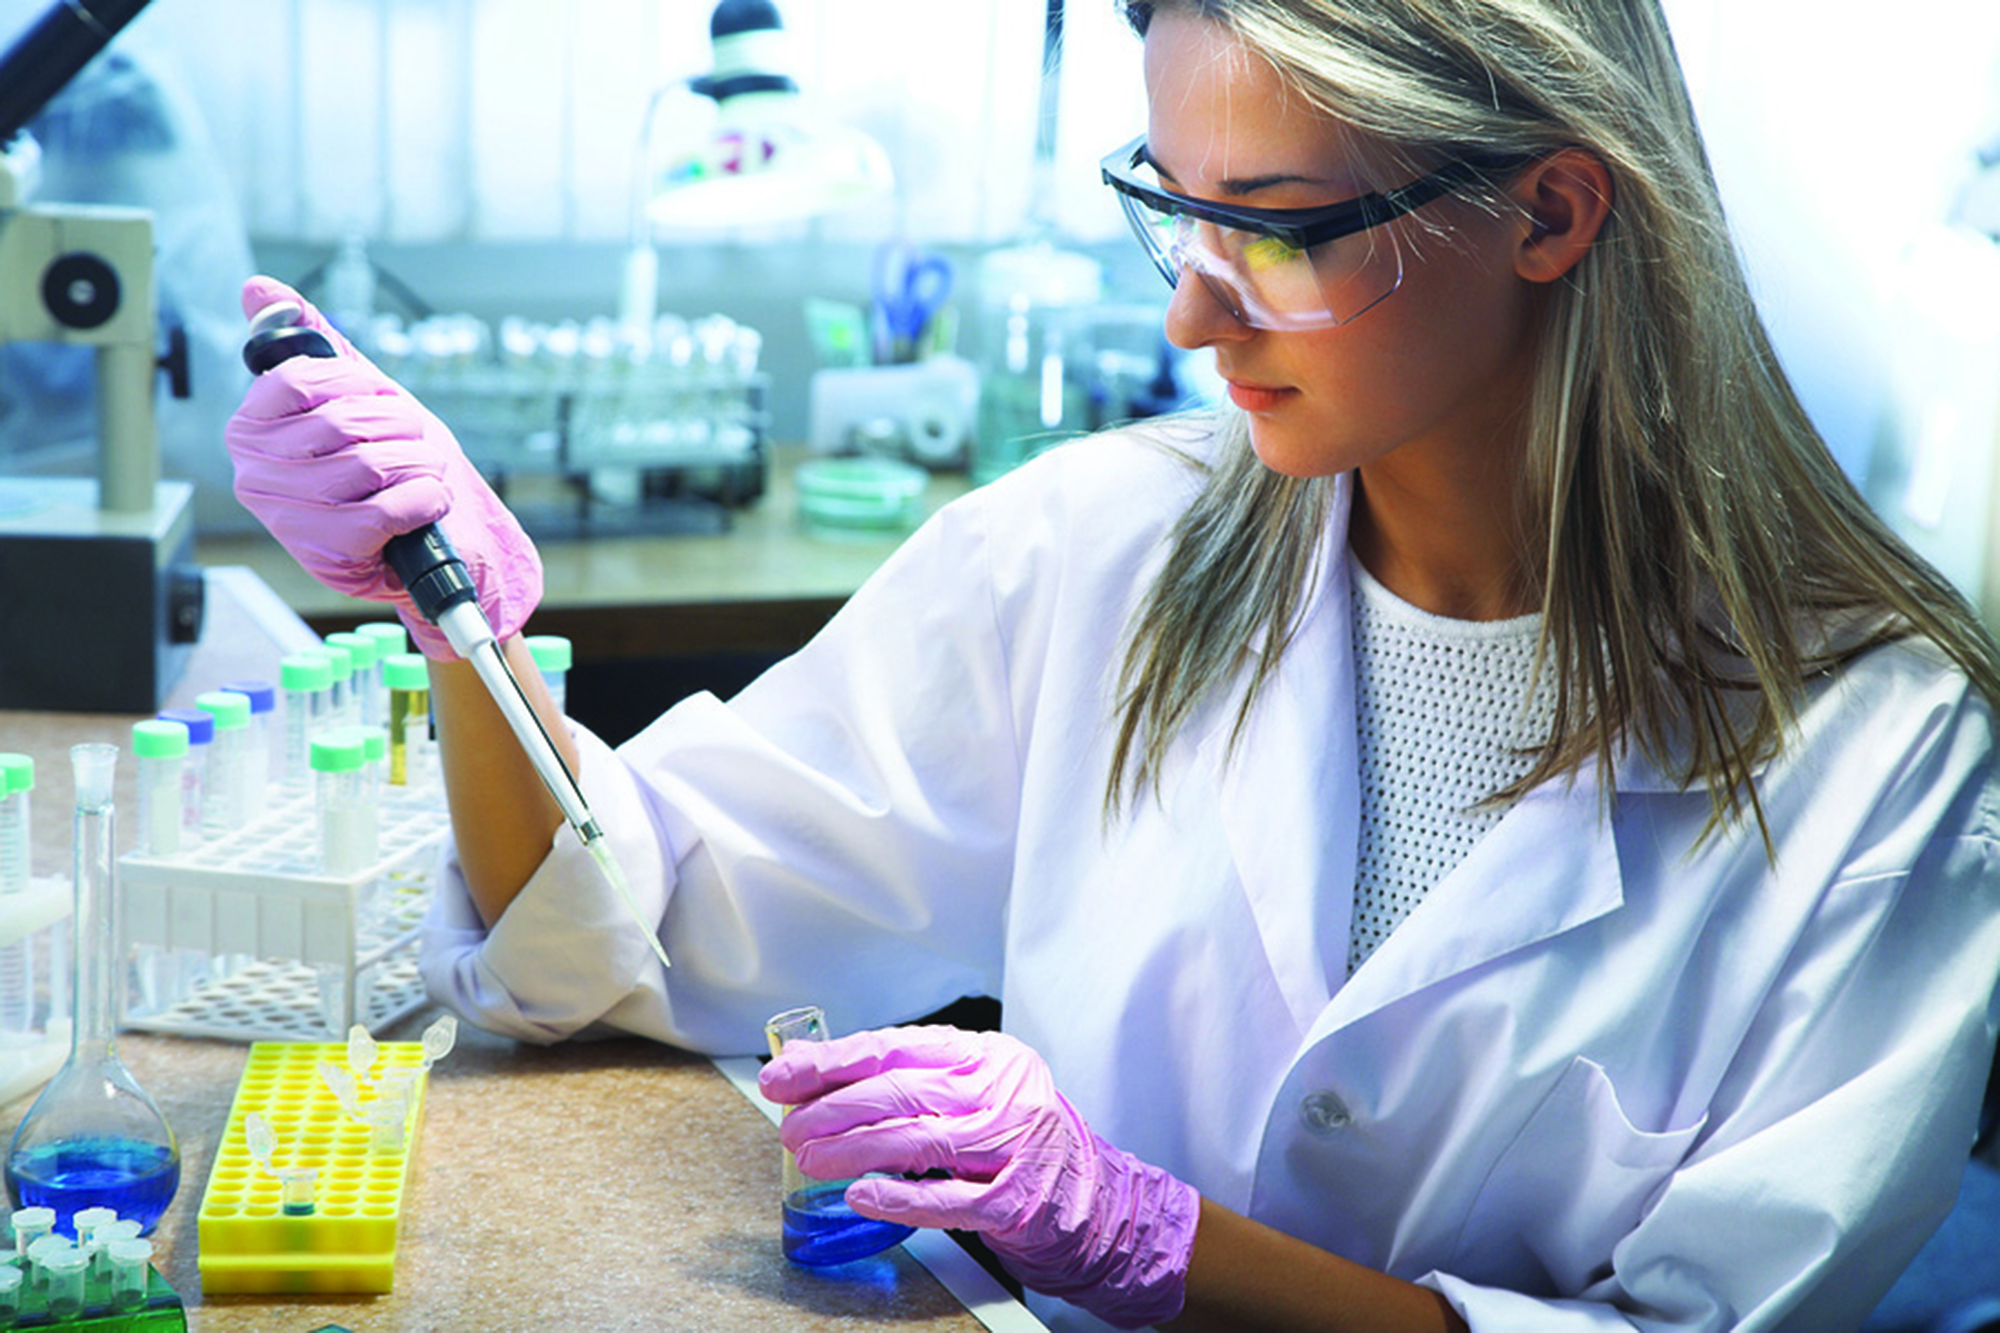 image of female student working in a lab setting with beakers and test tubes